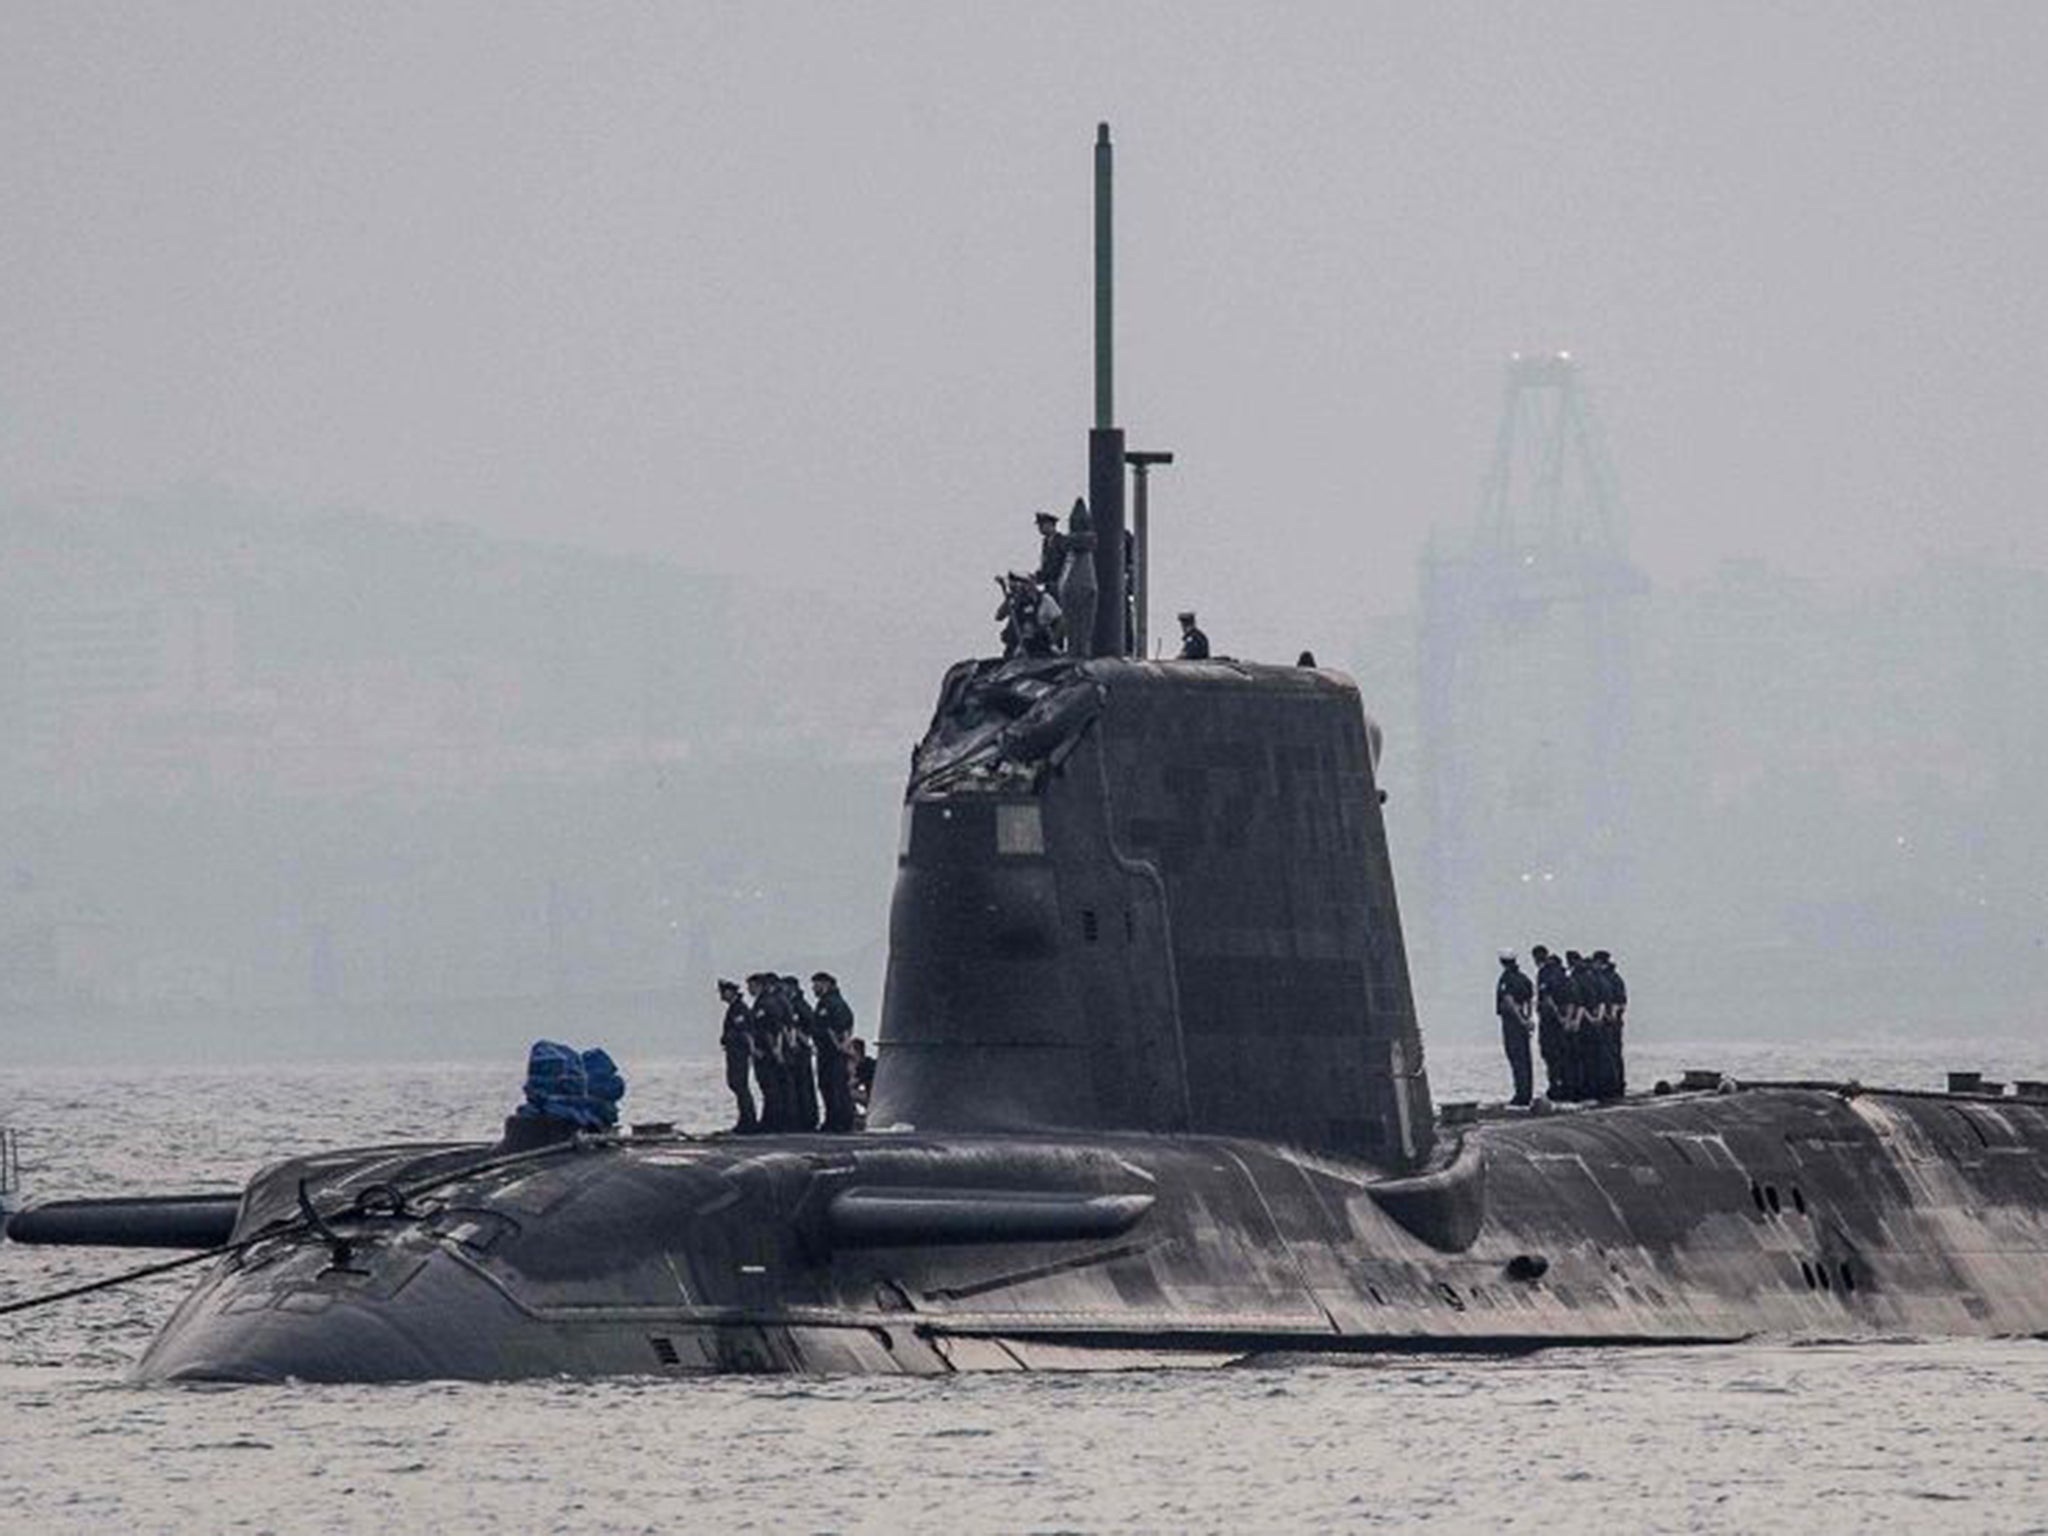 Damage is visible on the conning tower of HMS Ambush, an Astute-class nuclear-powered attack submarine